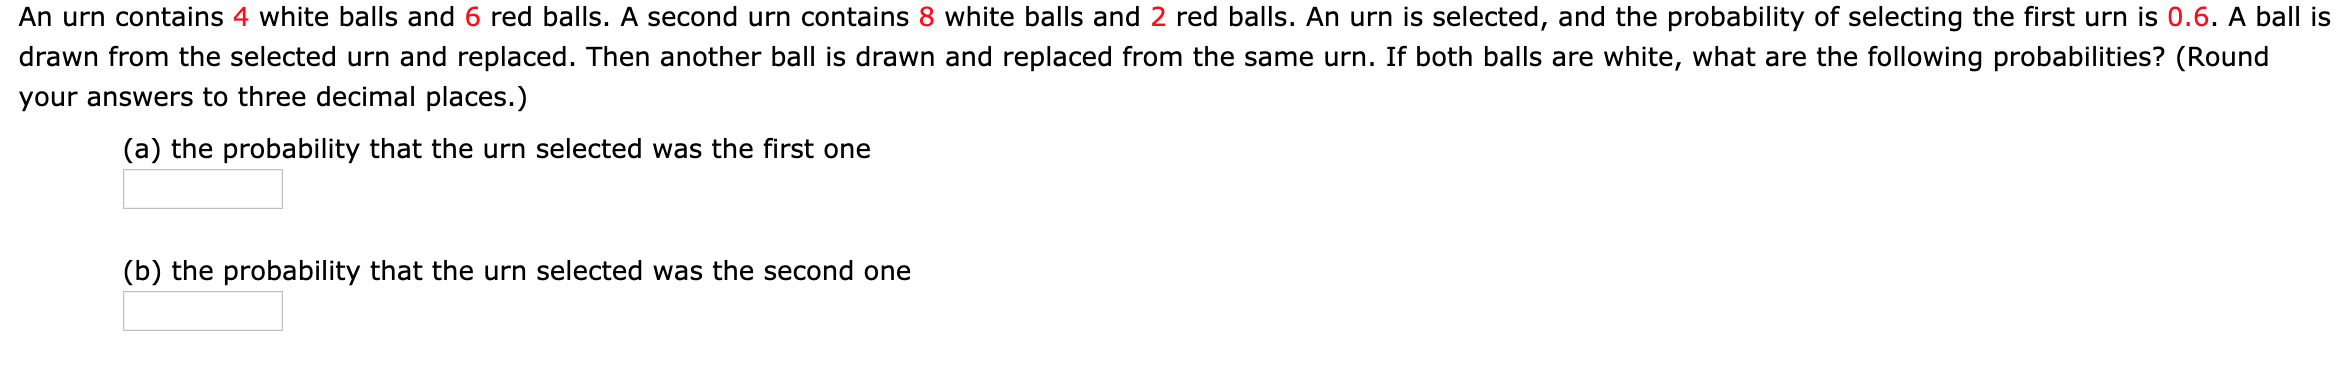 An urn contains 4 white balls and 6 red balls. A second urn contains 8 white balls and 2 red balls. An urn is selected, and the probability of selecting the first urn is 0.6. A ball is
drawn from the selected urn and replaced. Then another ball is drawn and replaced from the same urn. If both balls are white, what are the following probabilities? (Round
your answers to three decimal places.)
(a) the probability that the urn selected was the first one
(b) the probability that the urn selected was the second one
